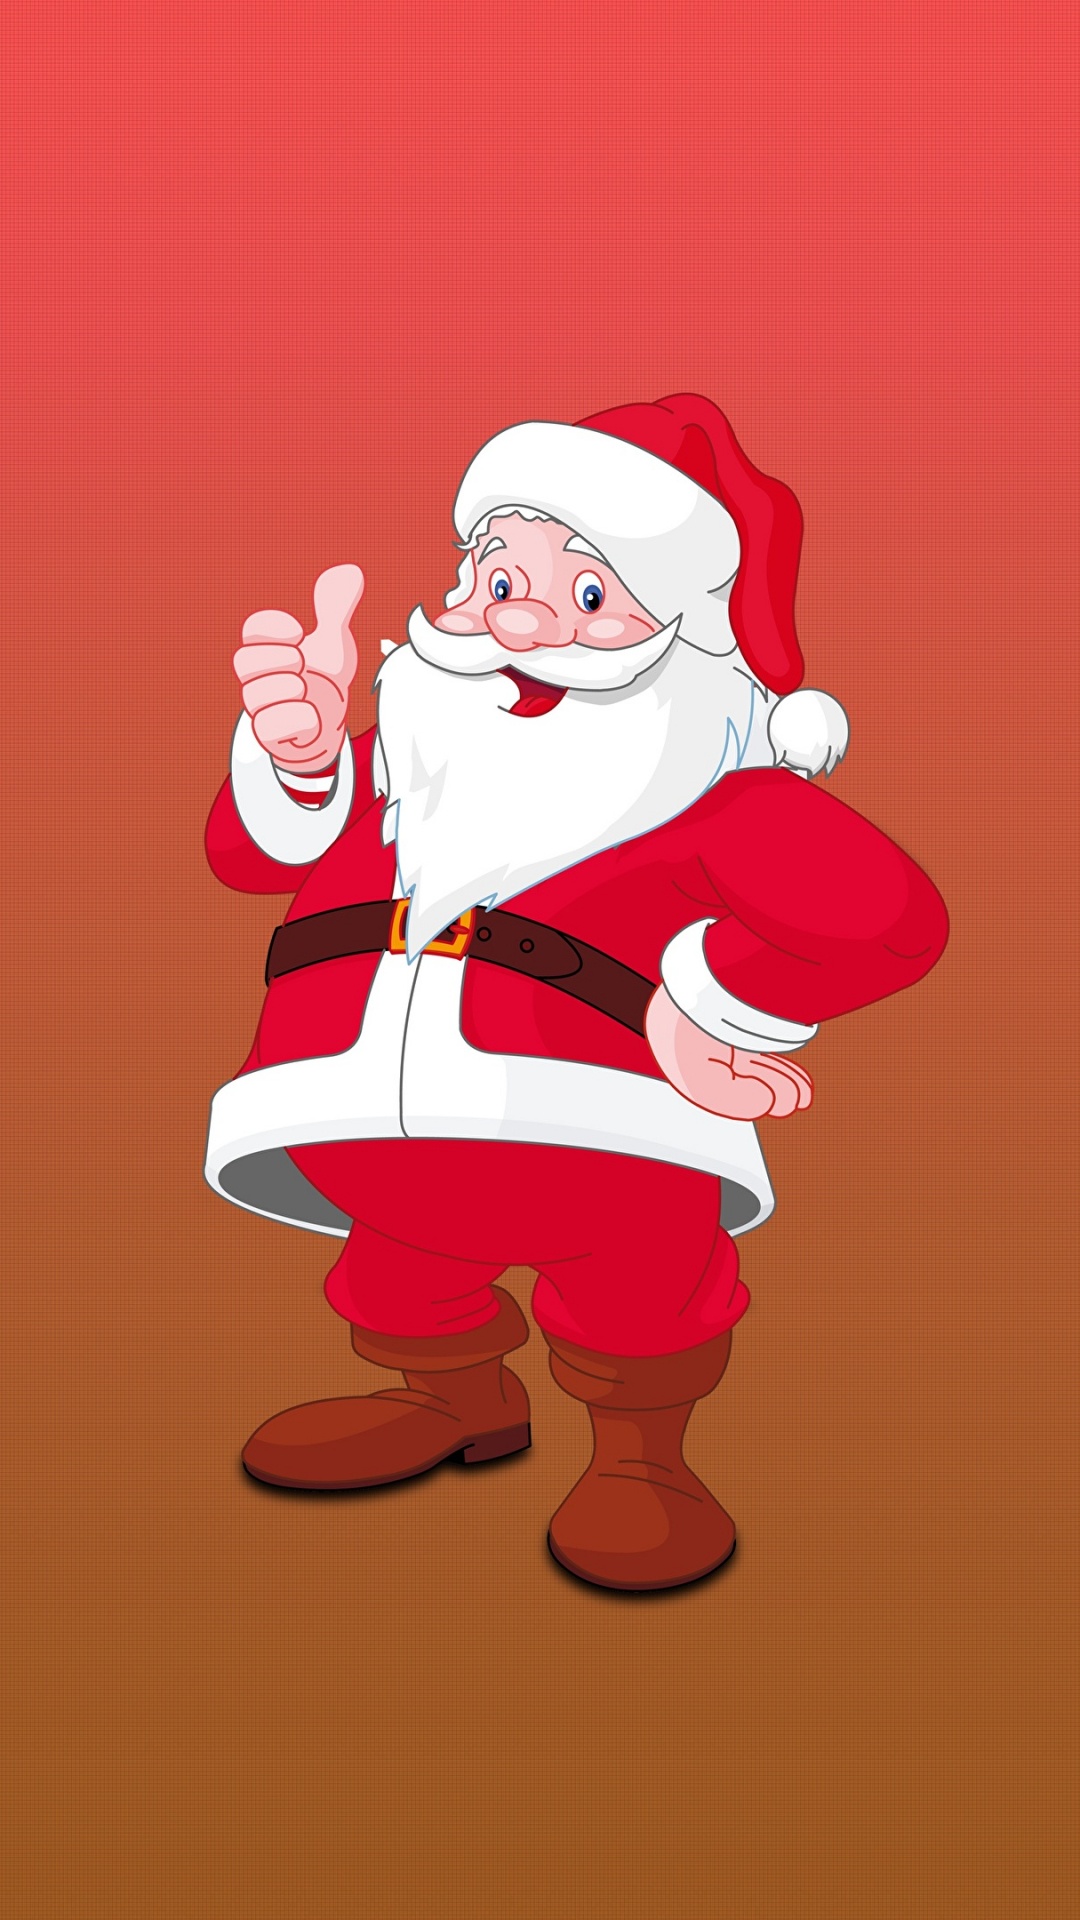 Santa Claus, Illustration, Ded Moroz, Christmas Day, Red. Wallpaper in 1080x1920 Resolution